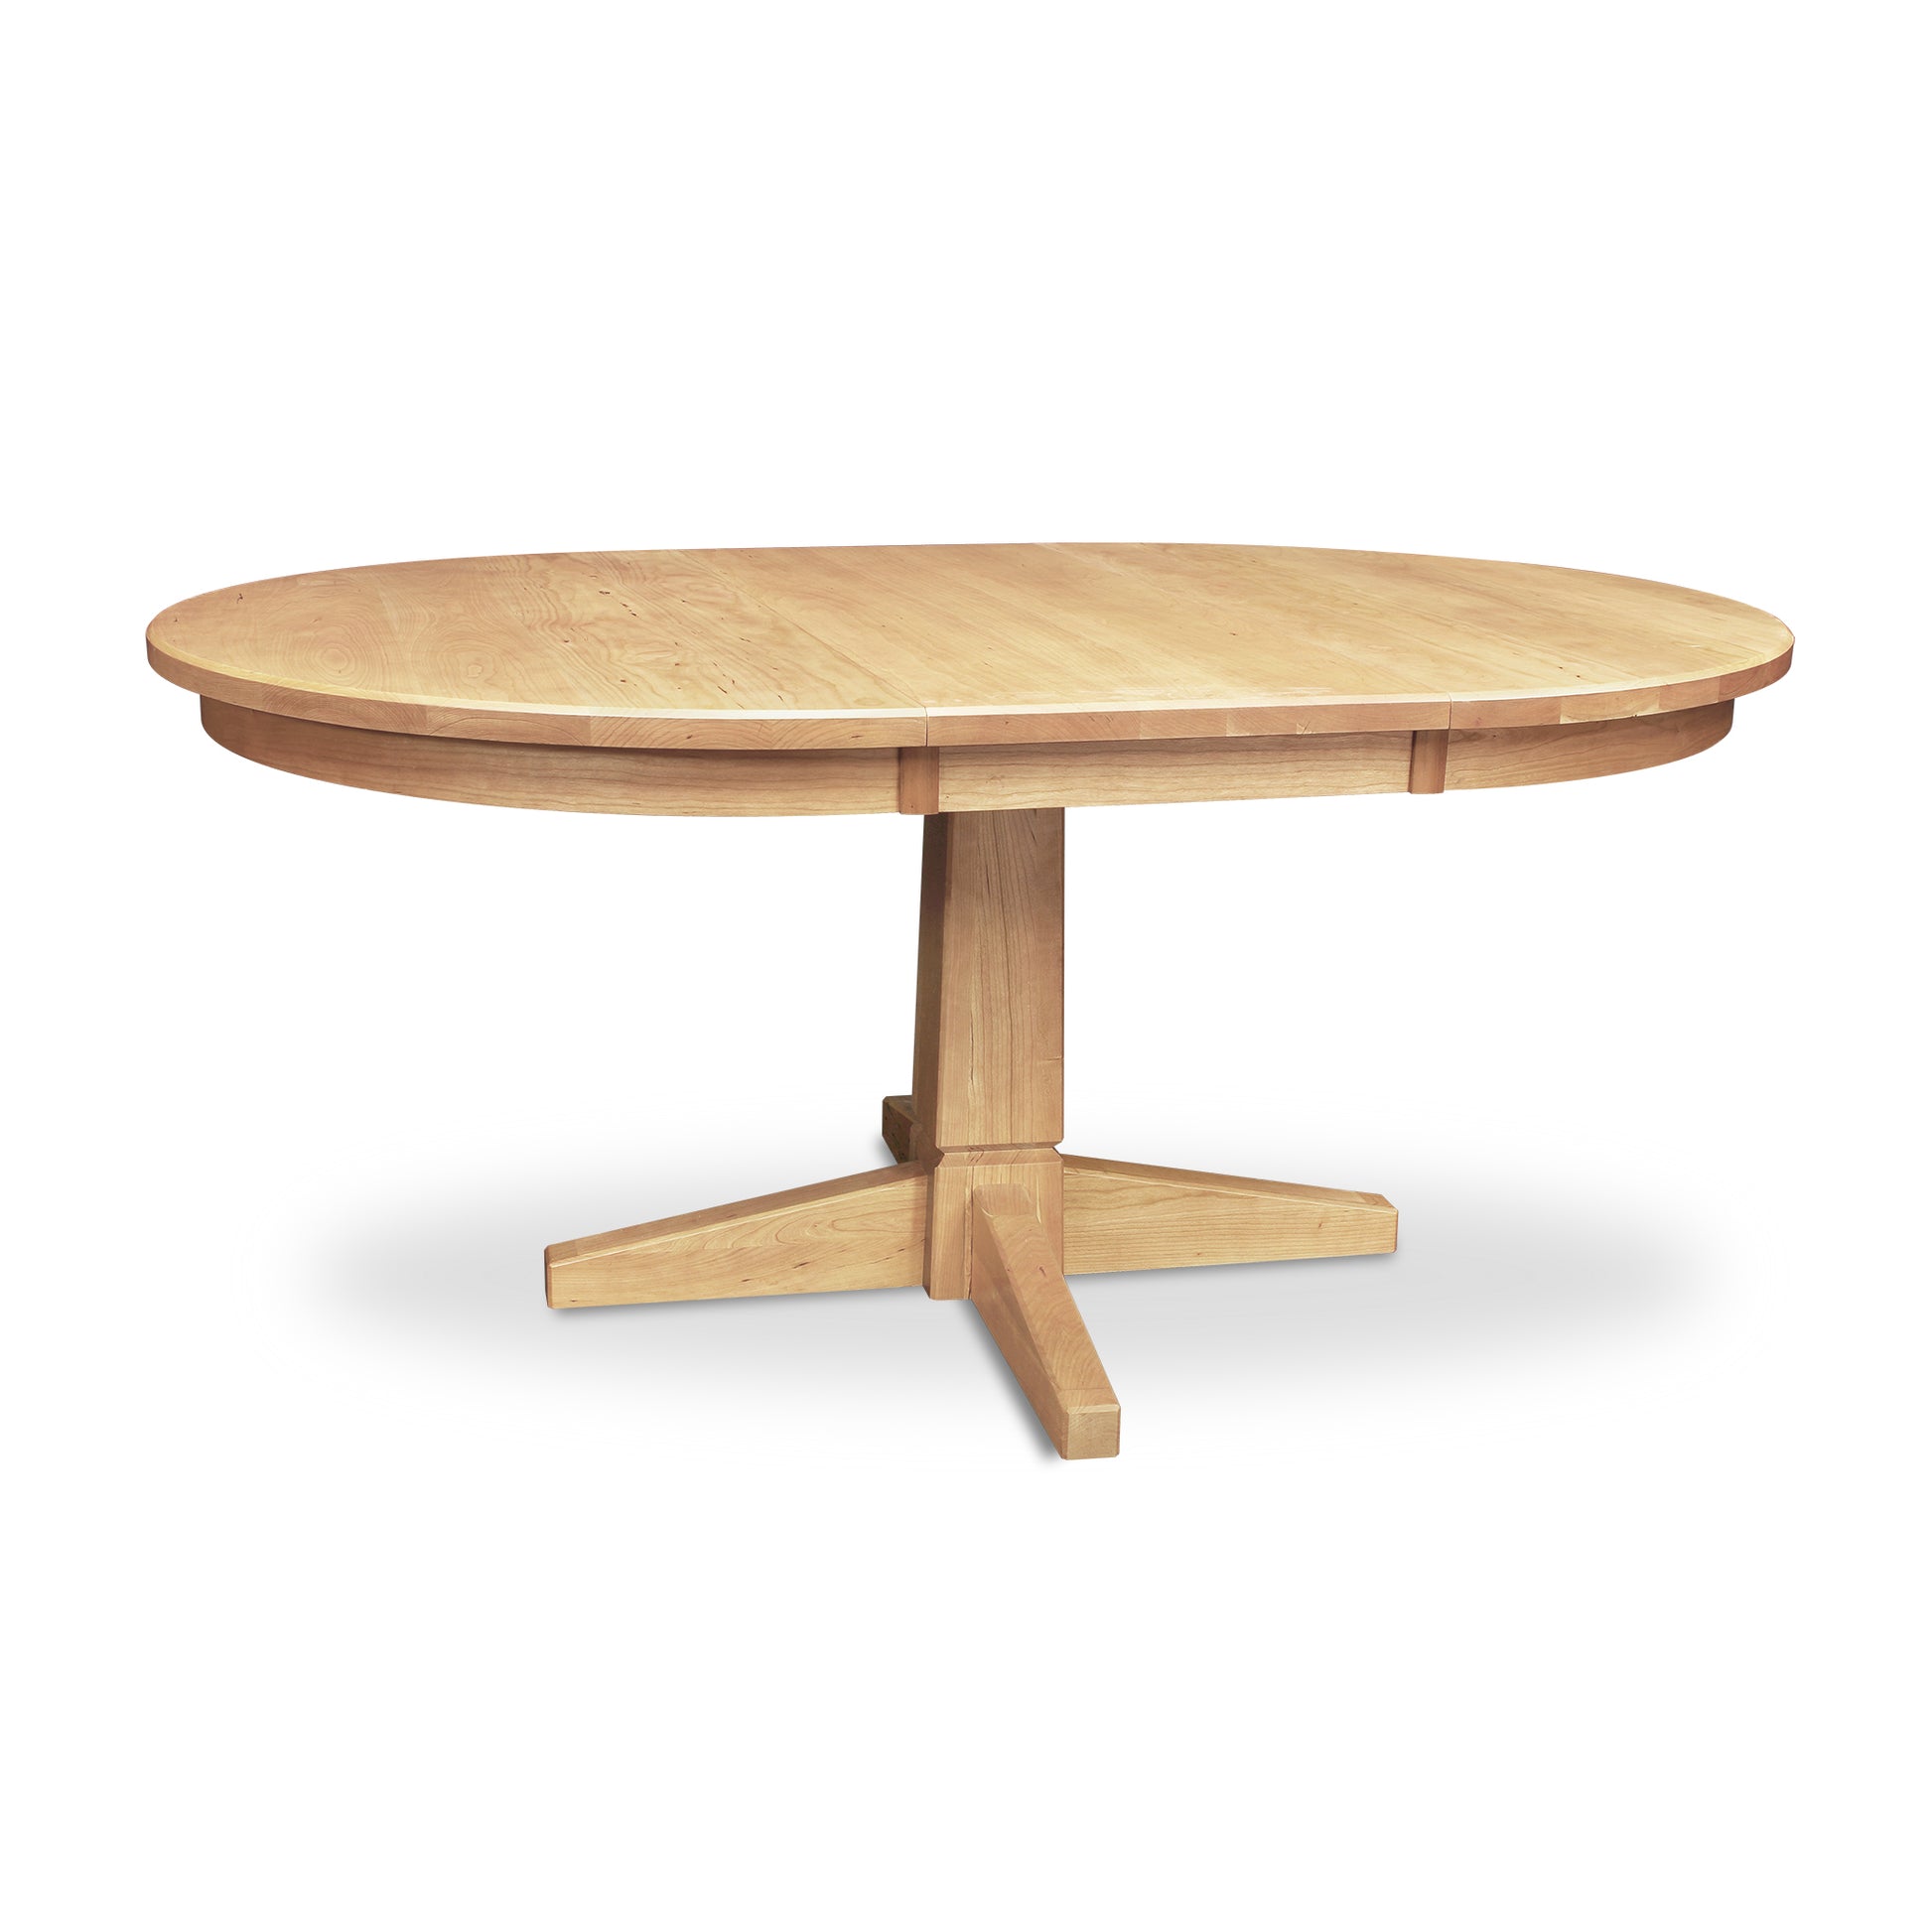 An eco-friendly Natural Vermont Single Pedestal Round Extension Table with a natural wood pedestal base by Lyndon Furniture.